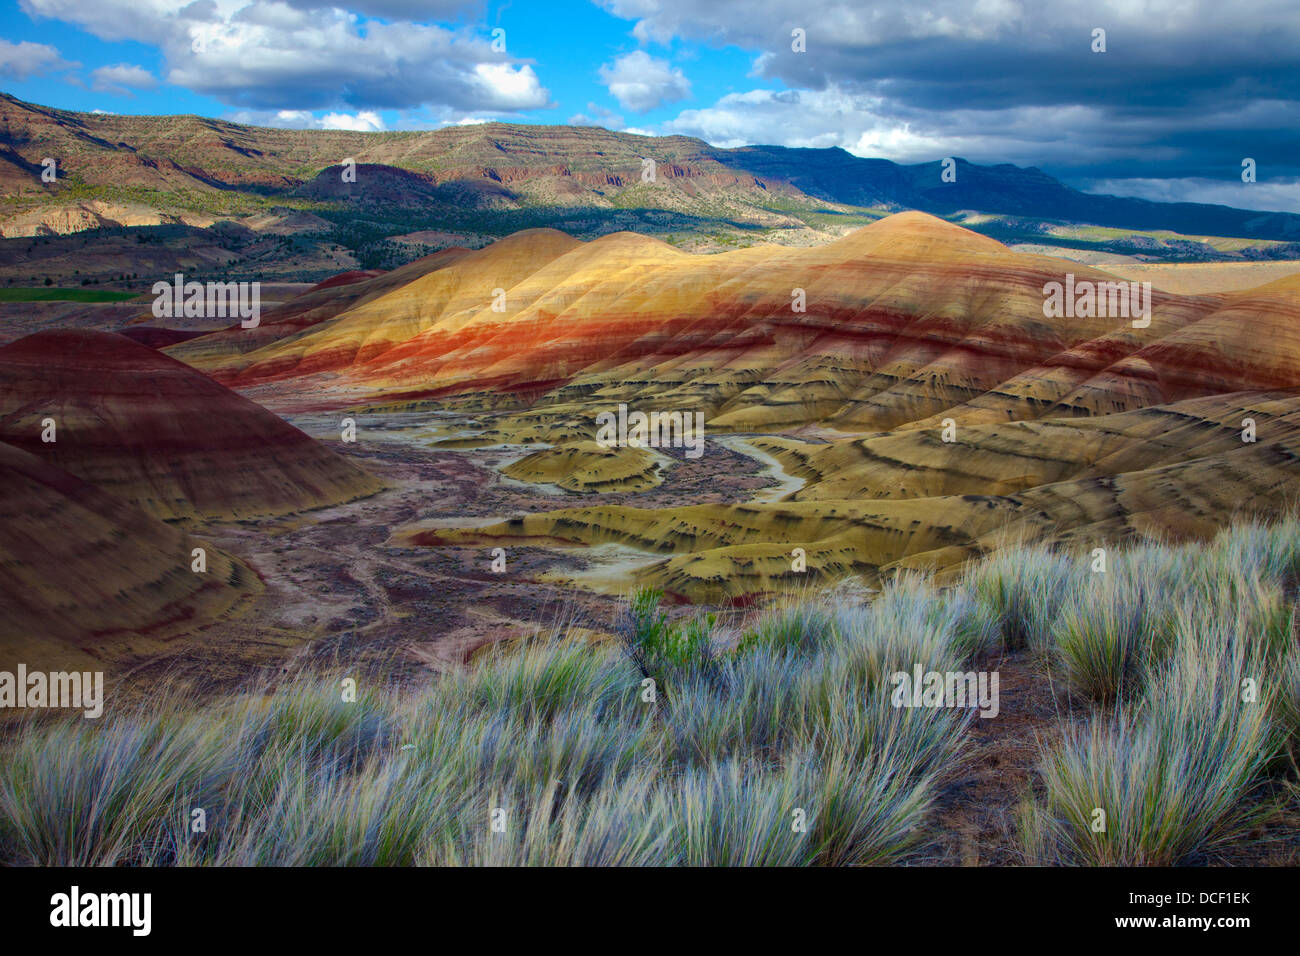 USA, Oregon. Landscape of the Painted Hills Unit, John Day Fossil Beds National Monument. Stock Photo